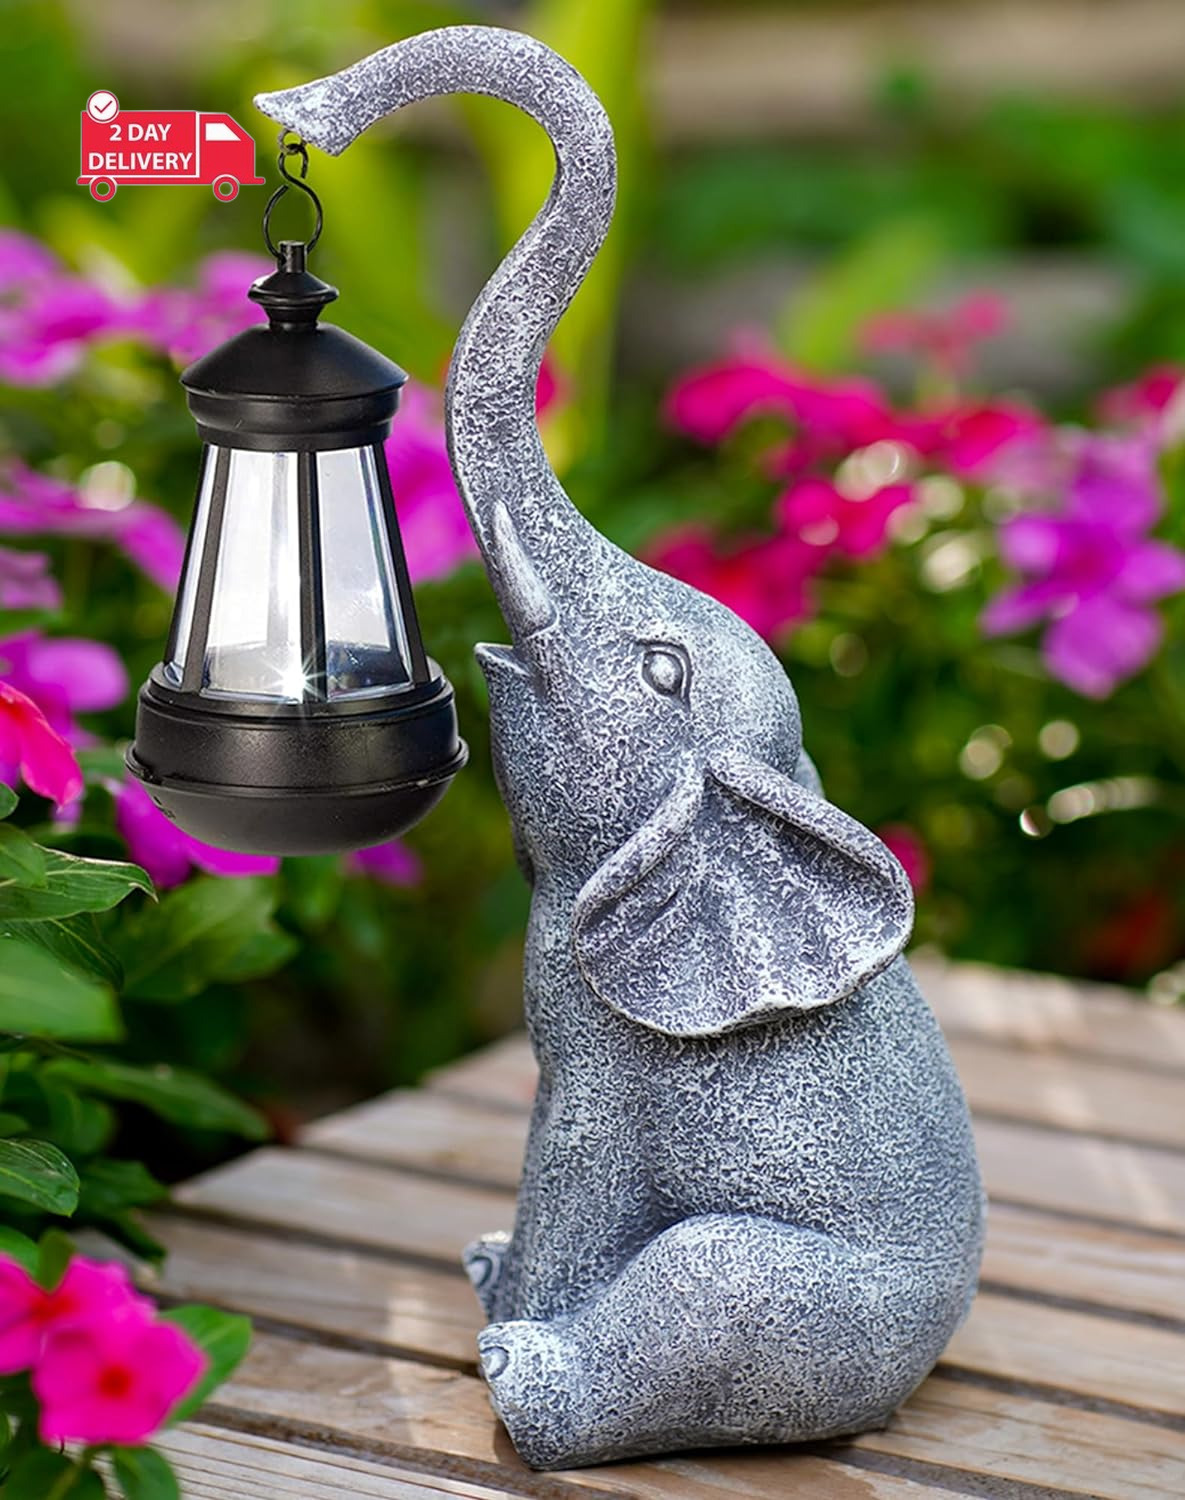 Elephant Statue for Garden Decor with Gift Appeal - Ideal Gifts for Women, Mom o